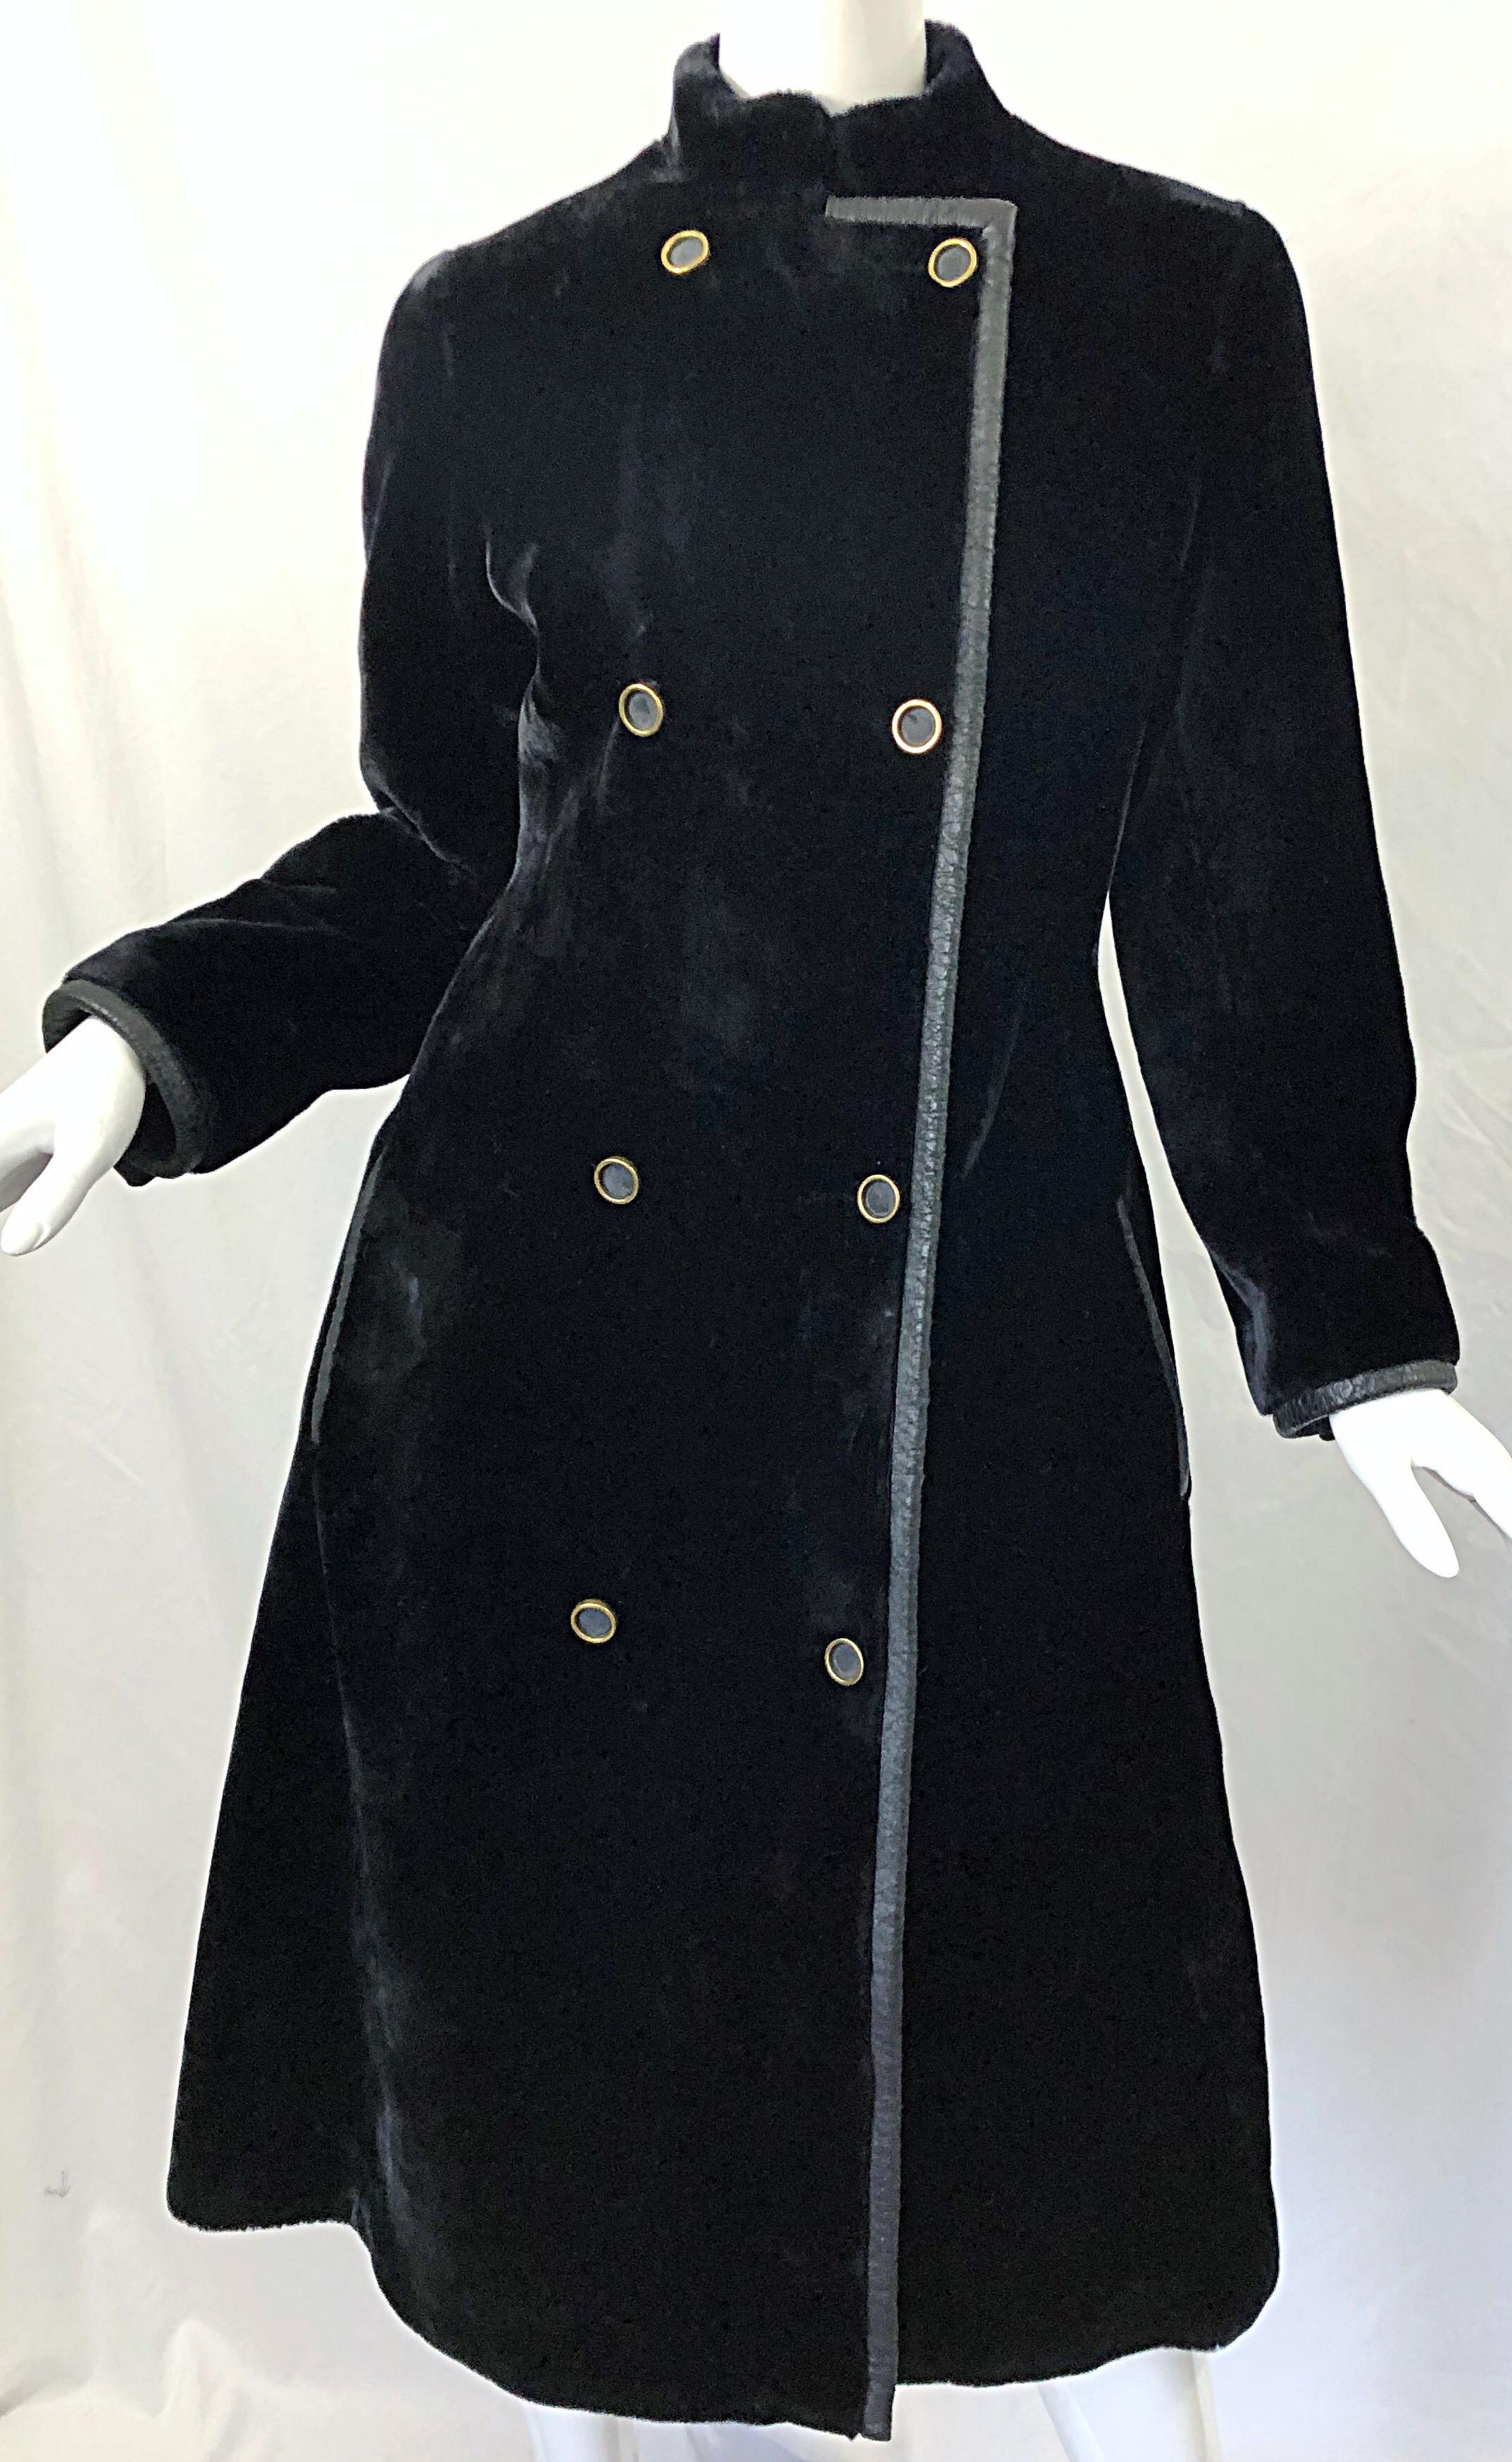 Givenchy 1960s Faux Fur Black Double Breasted Vintage 60s Swing Jacket Coat 9